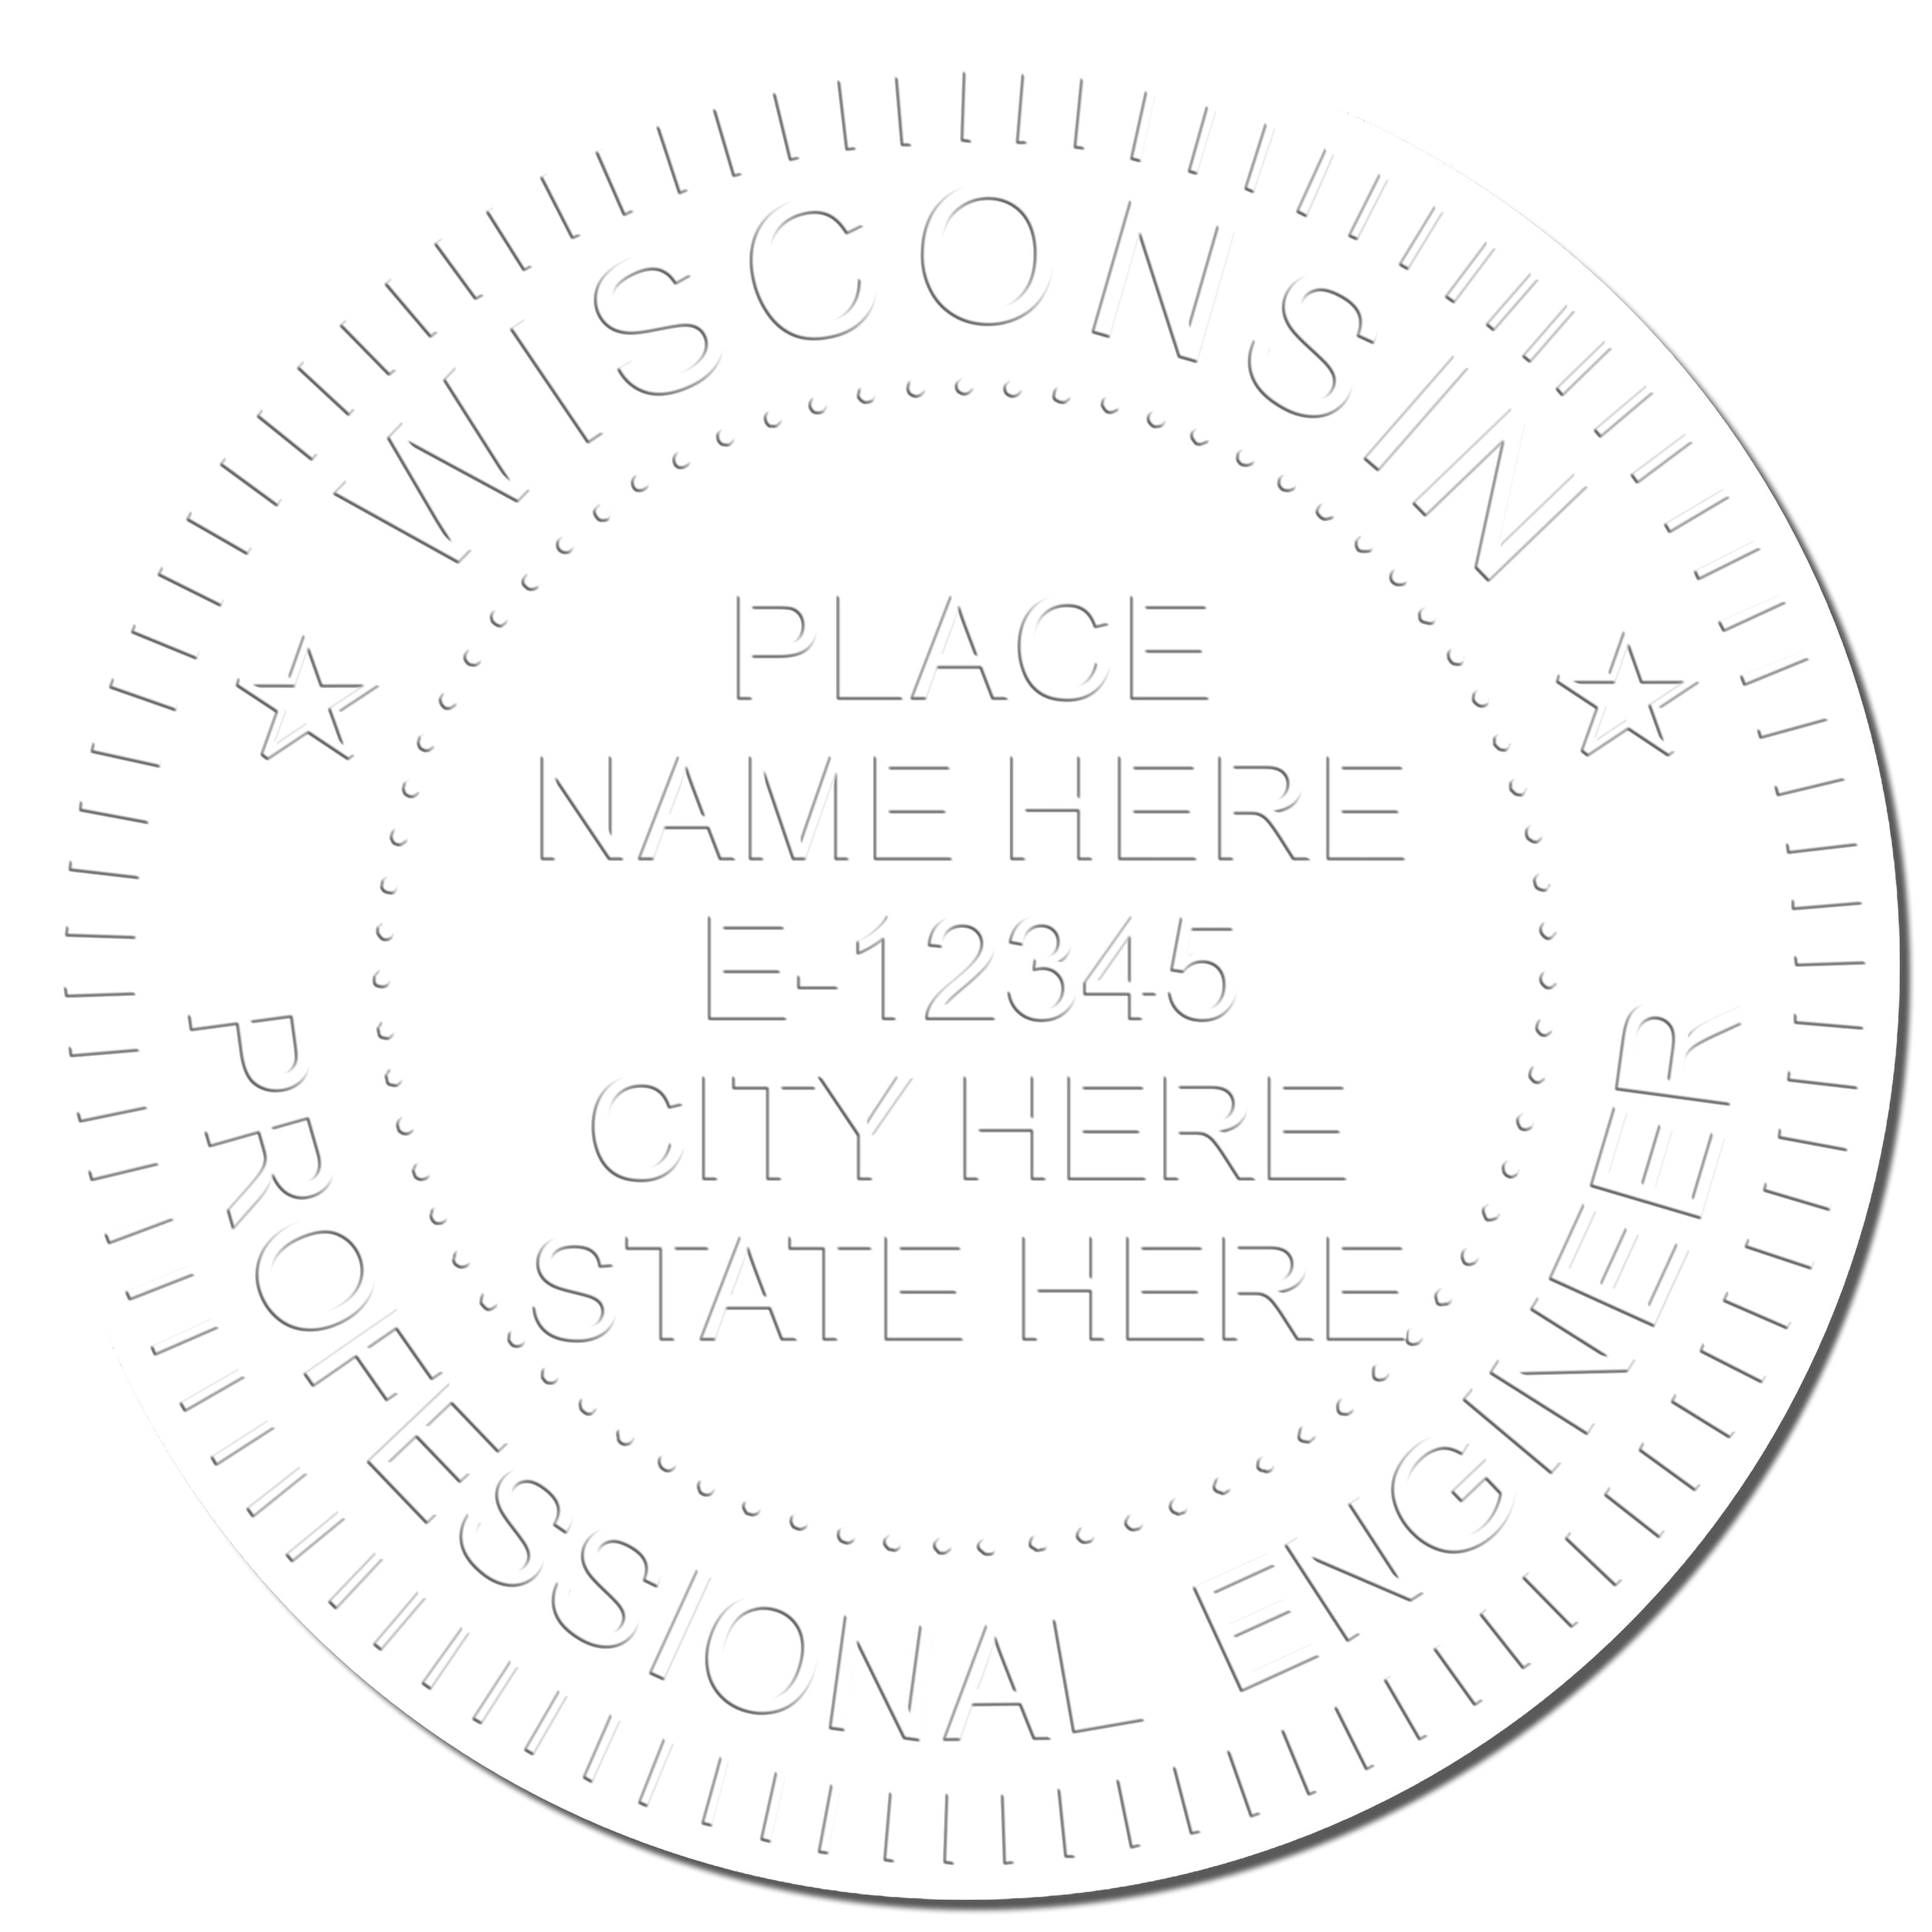 Another Example of a stamped impression of the Wisconsin Engineer Desk Seal on a piece of office paper.